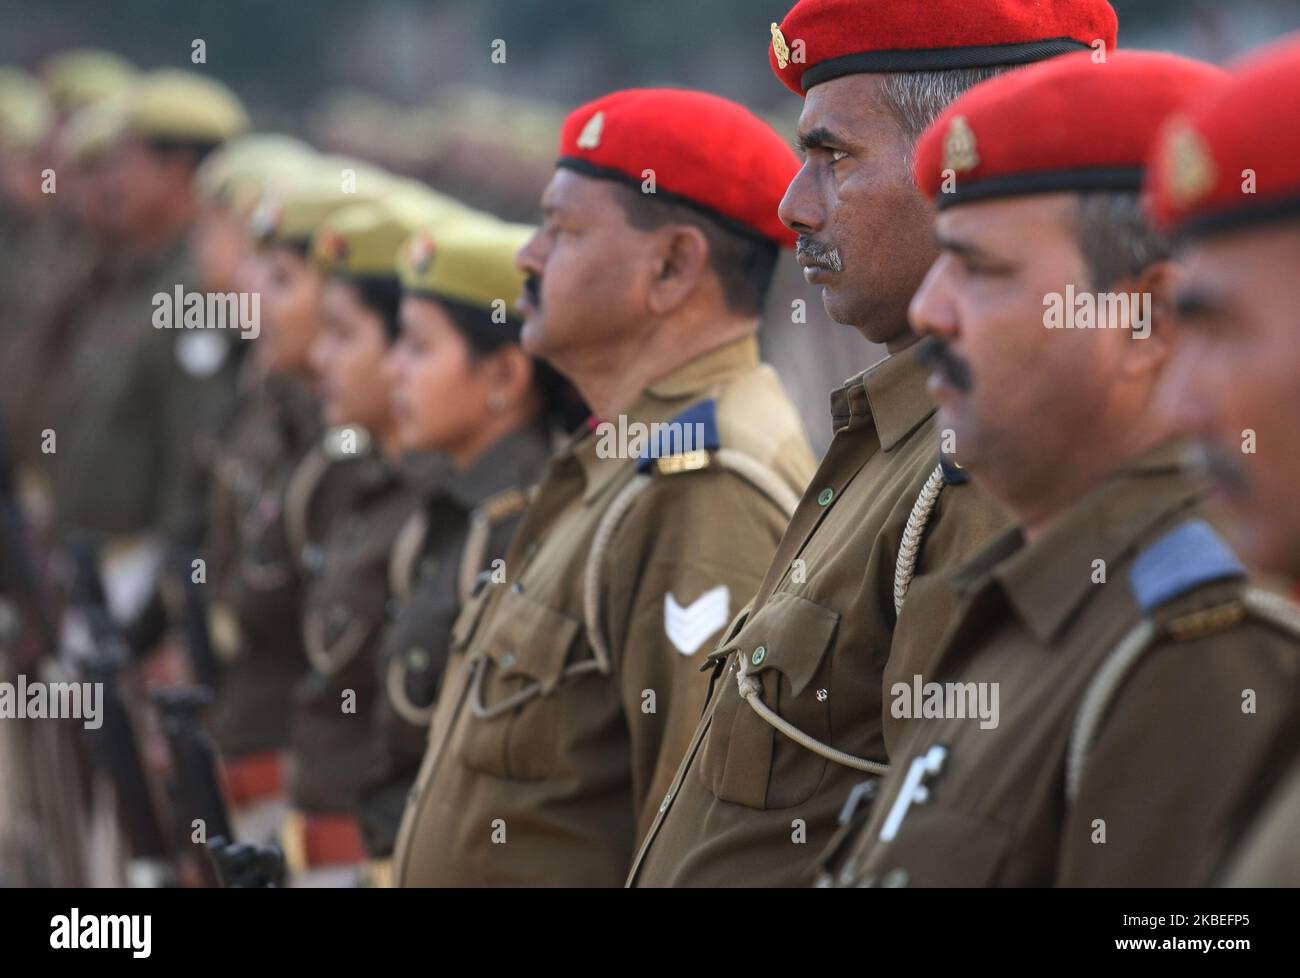 3,332 Indian Army Officers Images, Stock Photos, 3D objects